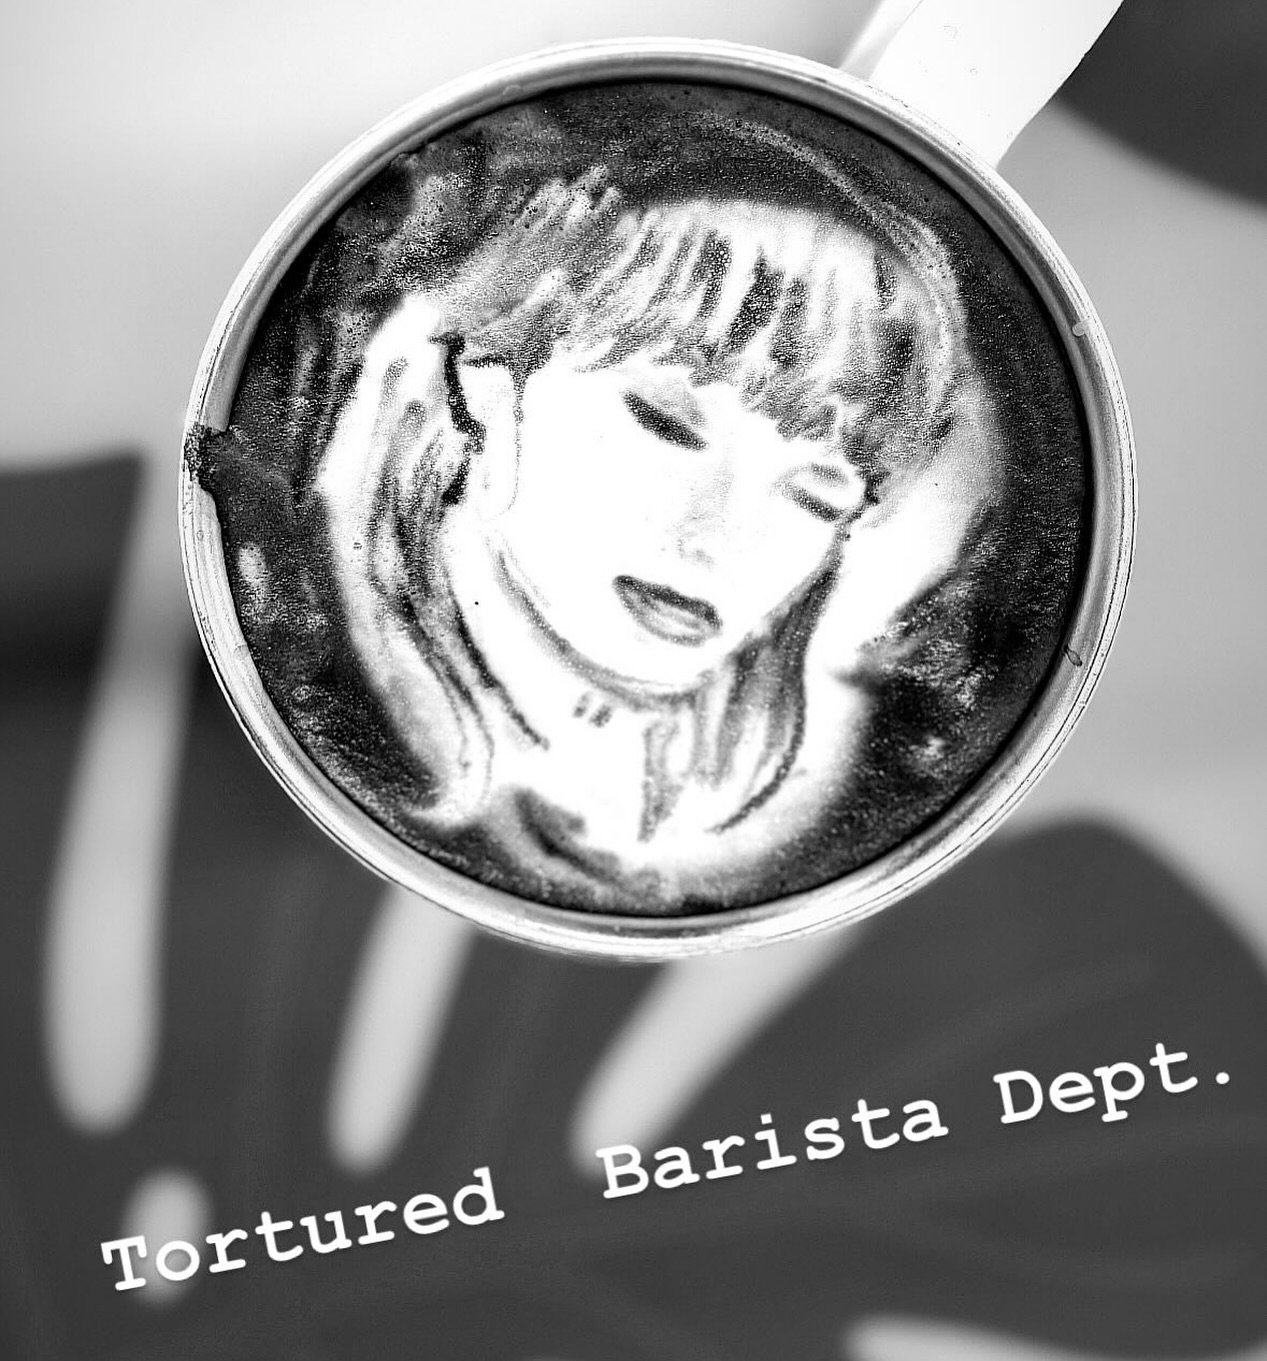 &ldquo;So long, latte&rdquo; was definitely about a cup of Joe. #taylorswift #torturedpoetsdepartment #torturedpoets #swiftie #swifties